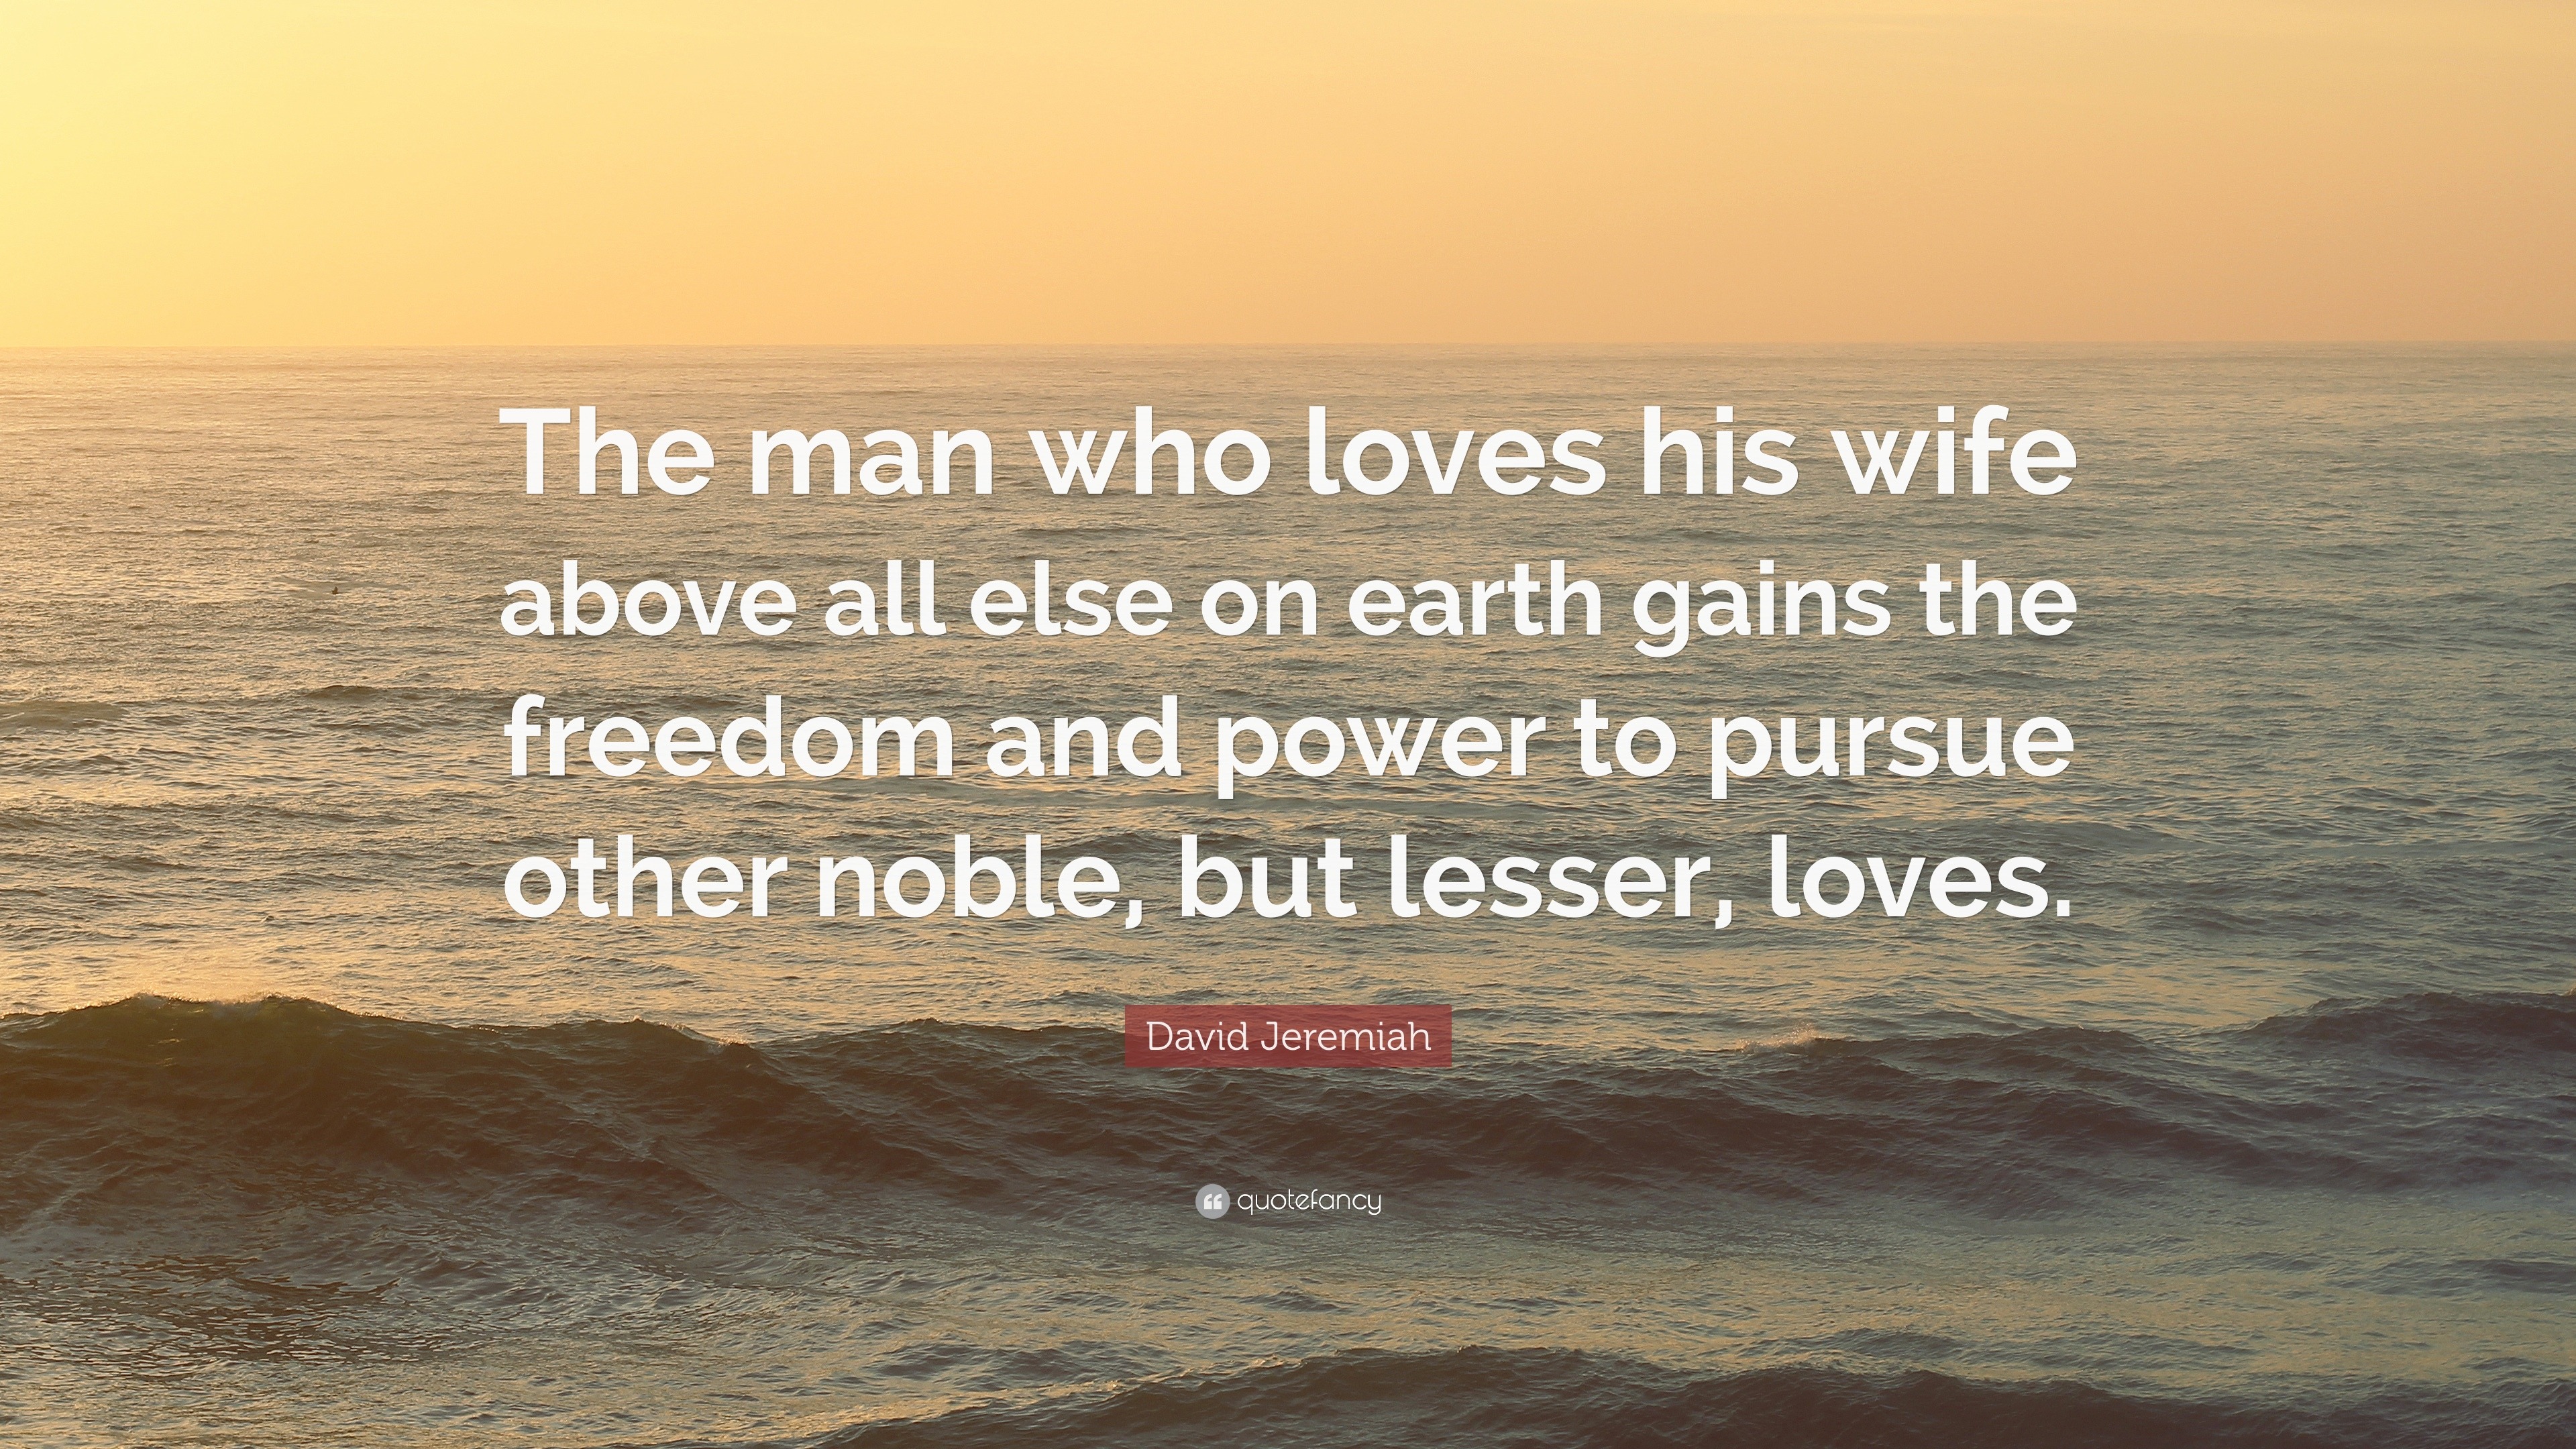 David Jeremiah Quote “The man who loves his wife above all else on earth